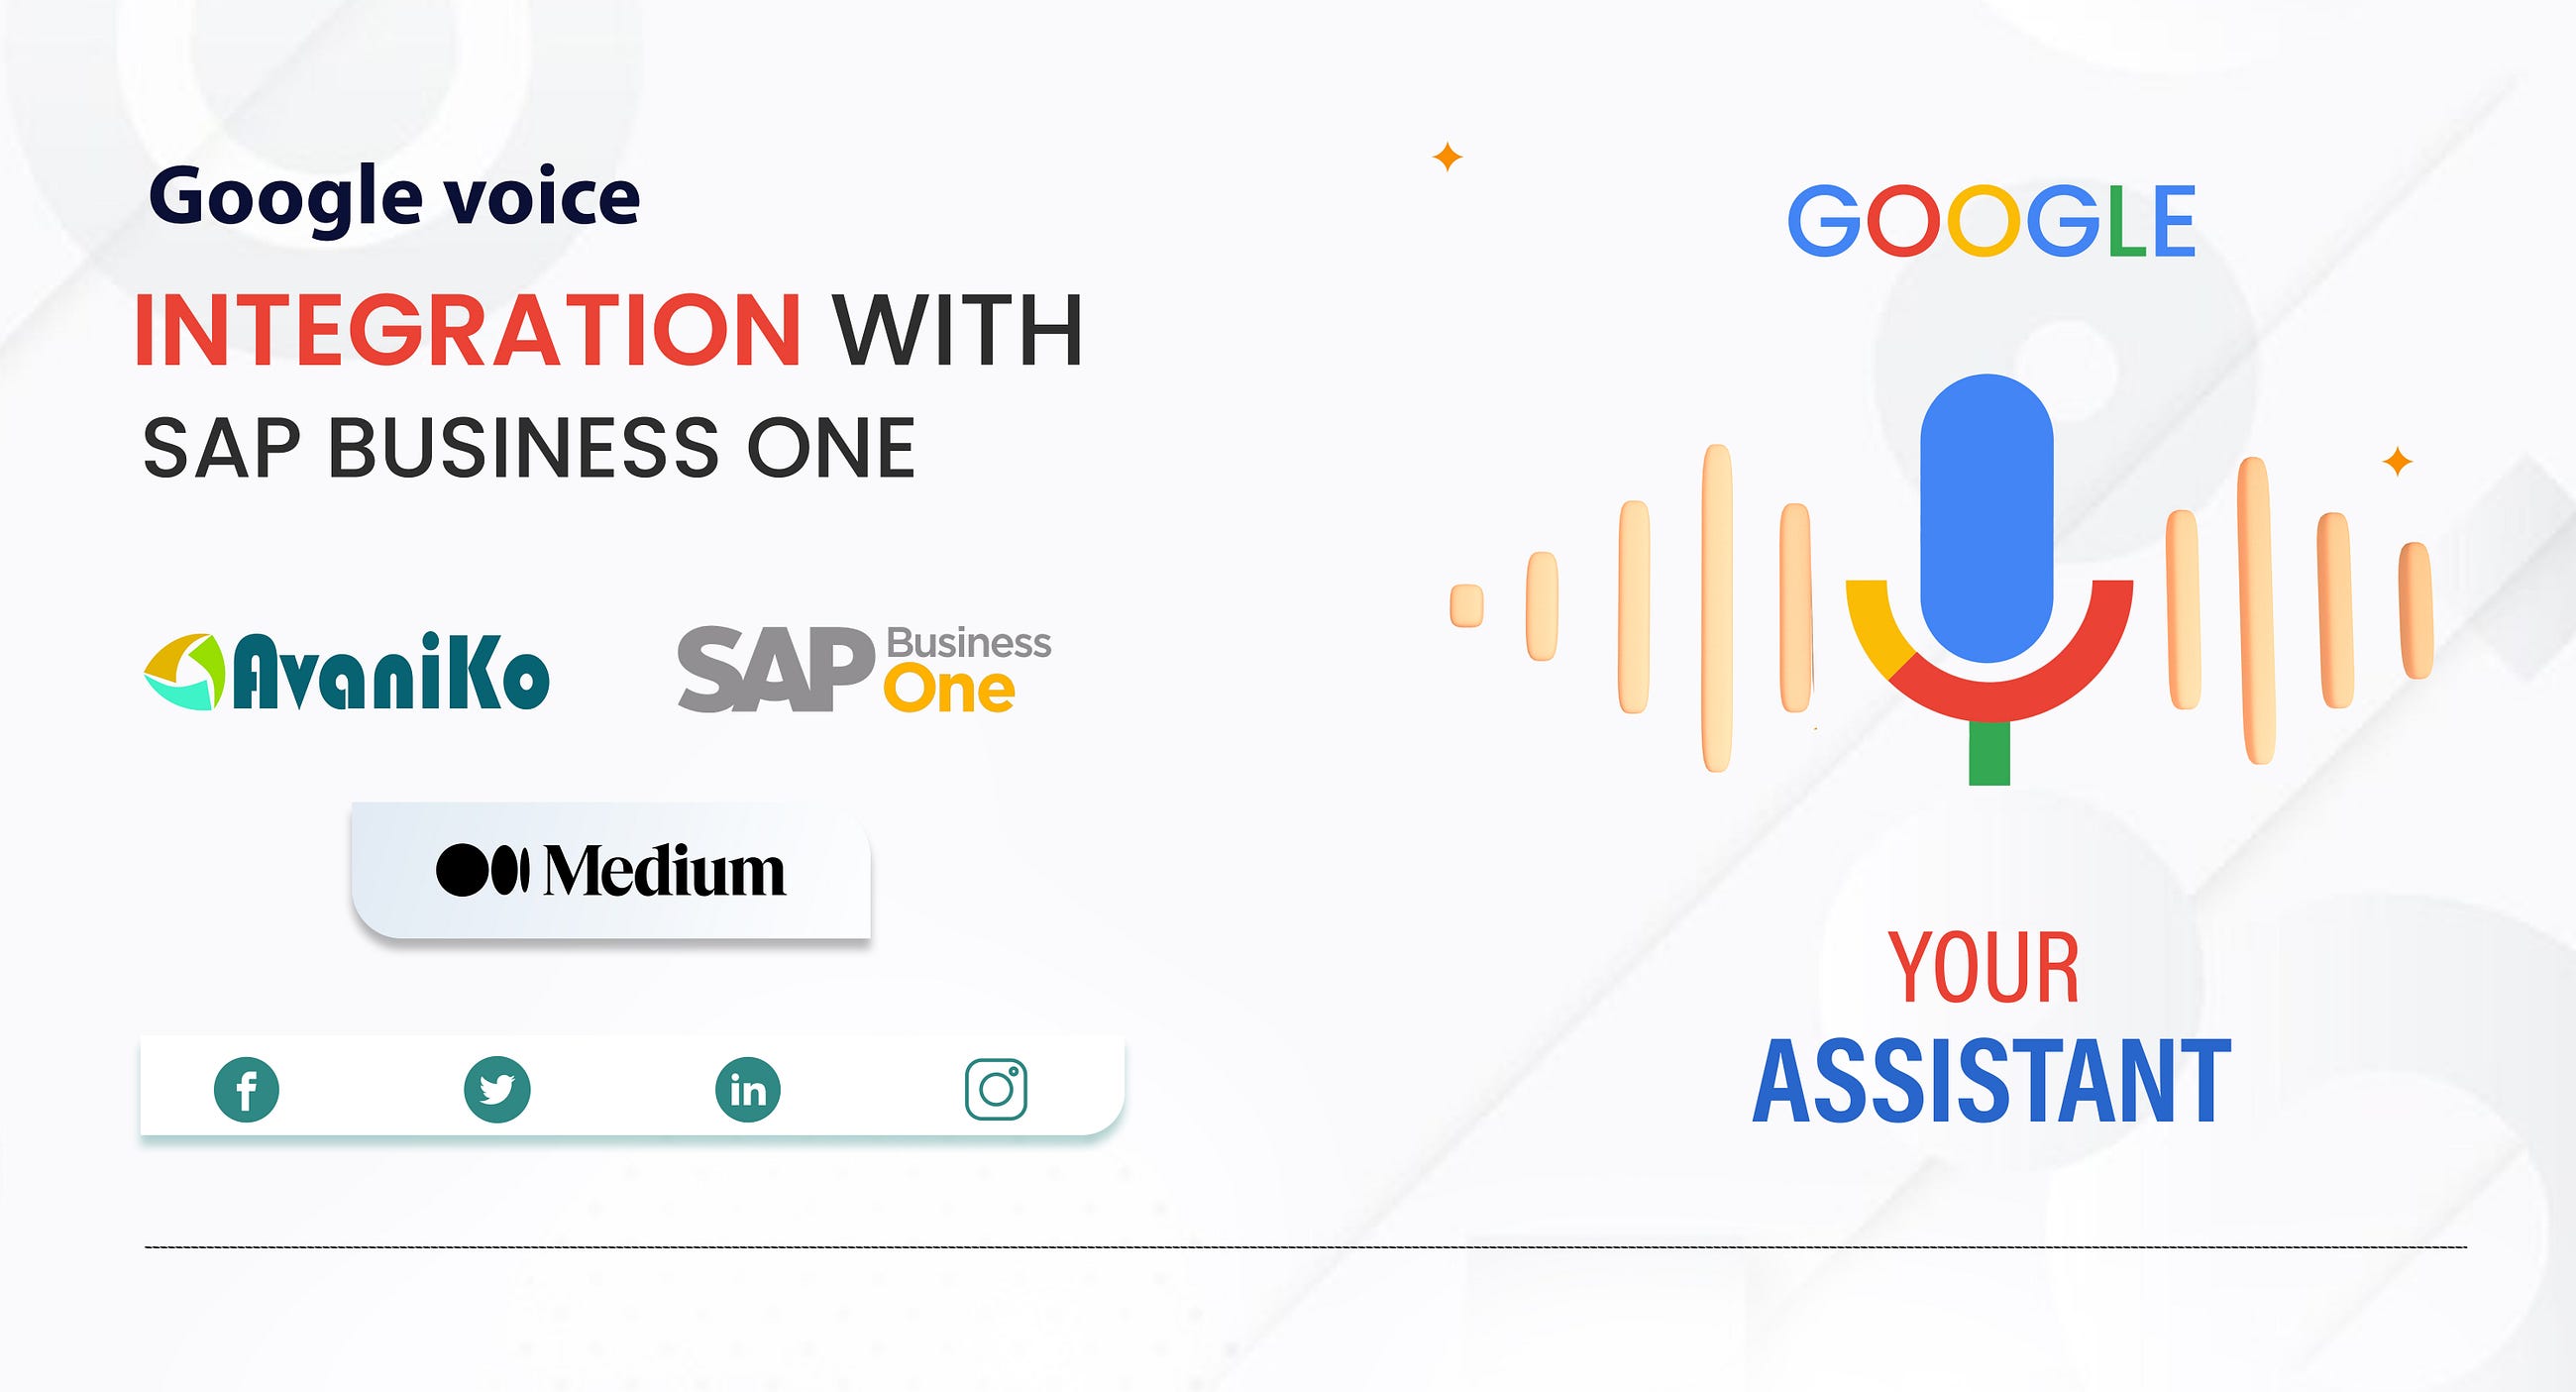 Google voice integration with SAP Business One